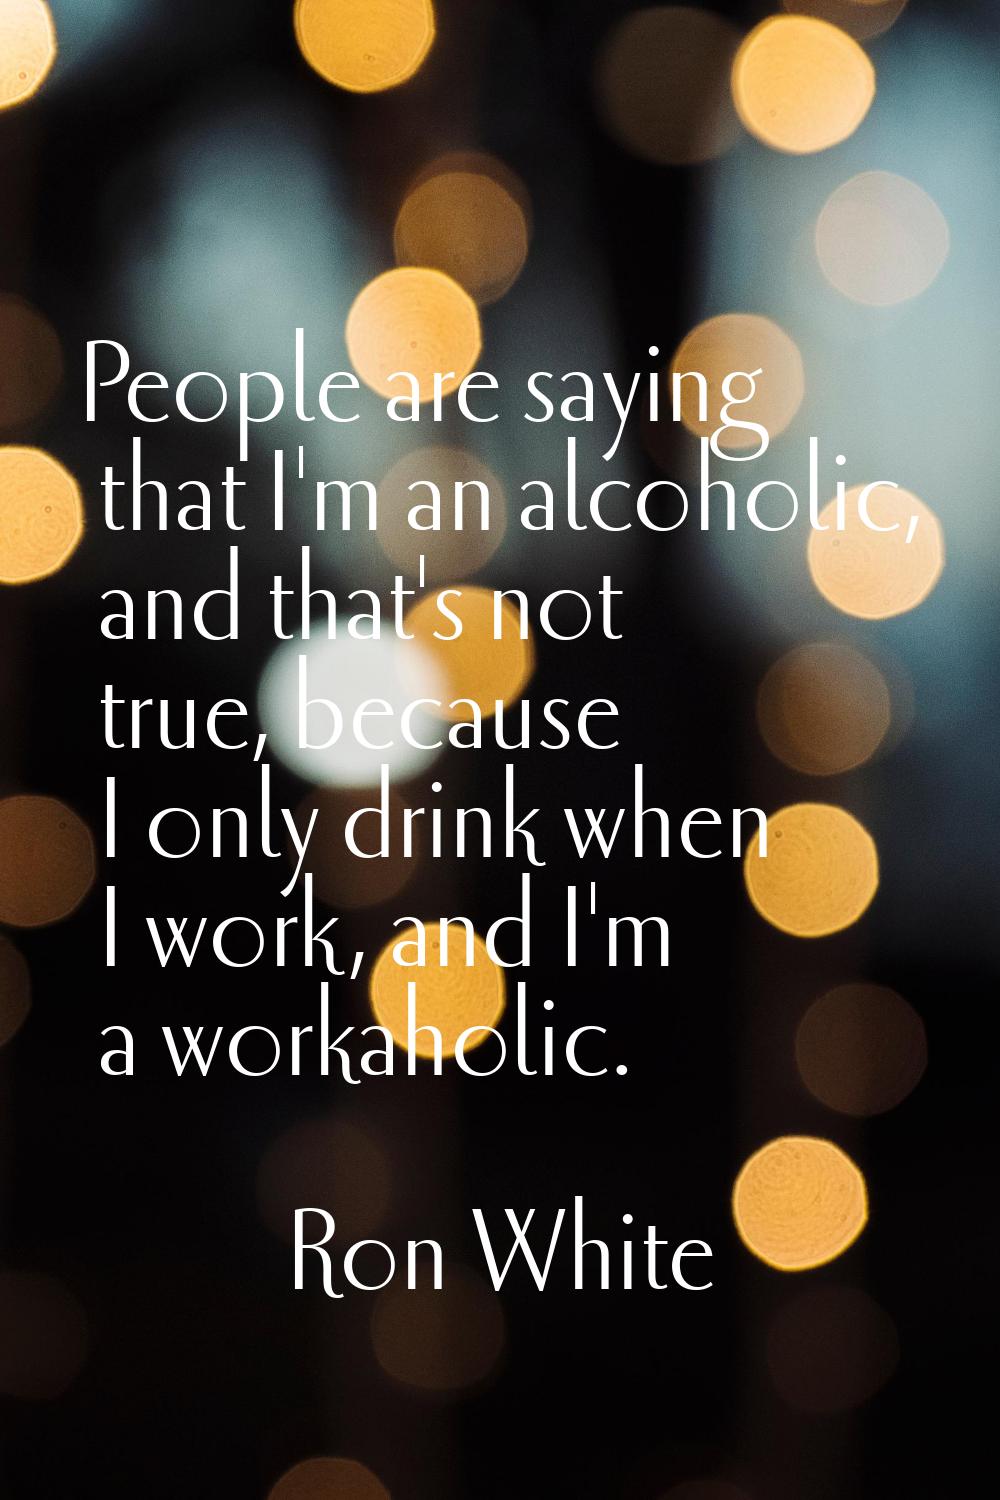 People are saying that I'm an alcoholic, and that's not true, because I only drink when I work, and